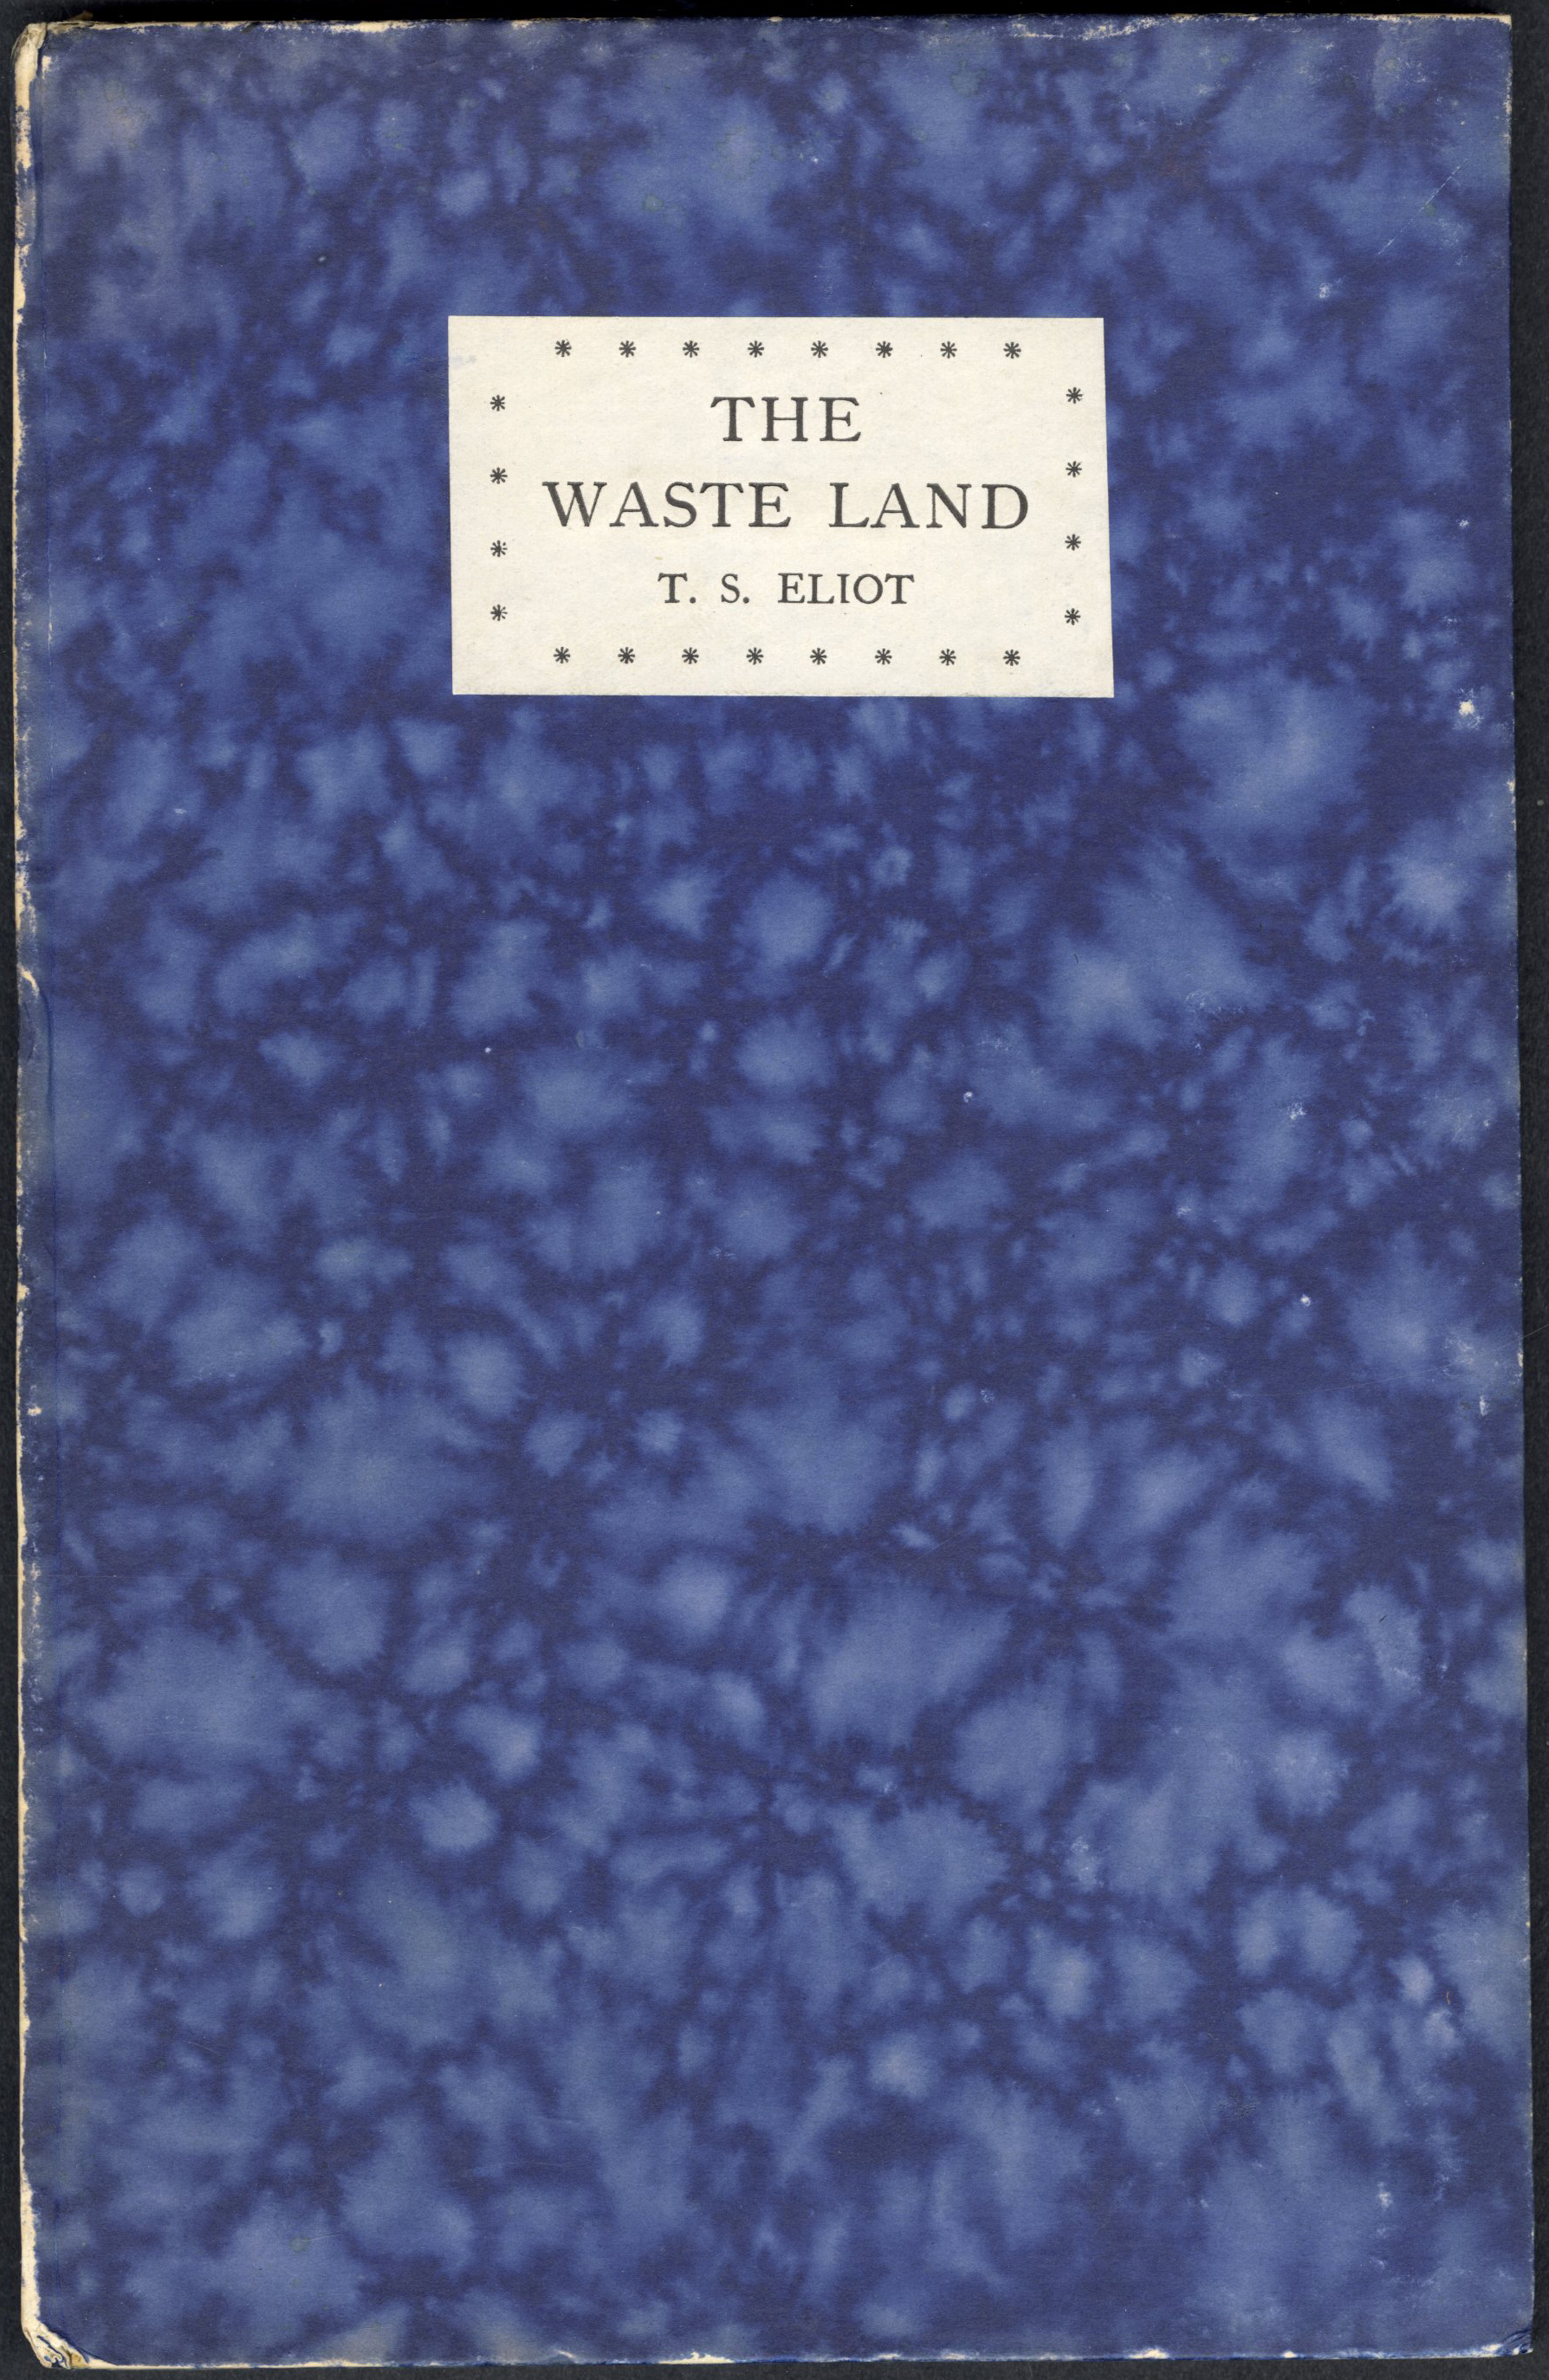 Image of front cover of the first edition of The Waste Land by T.S Eliot - which has blue marbled cover papers 